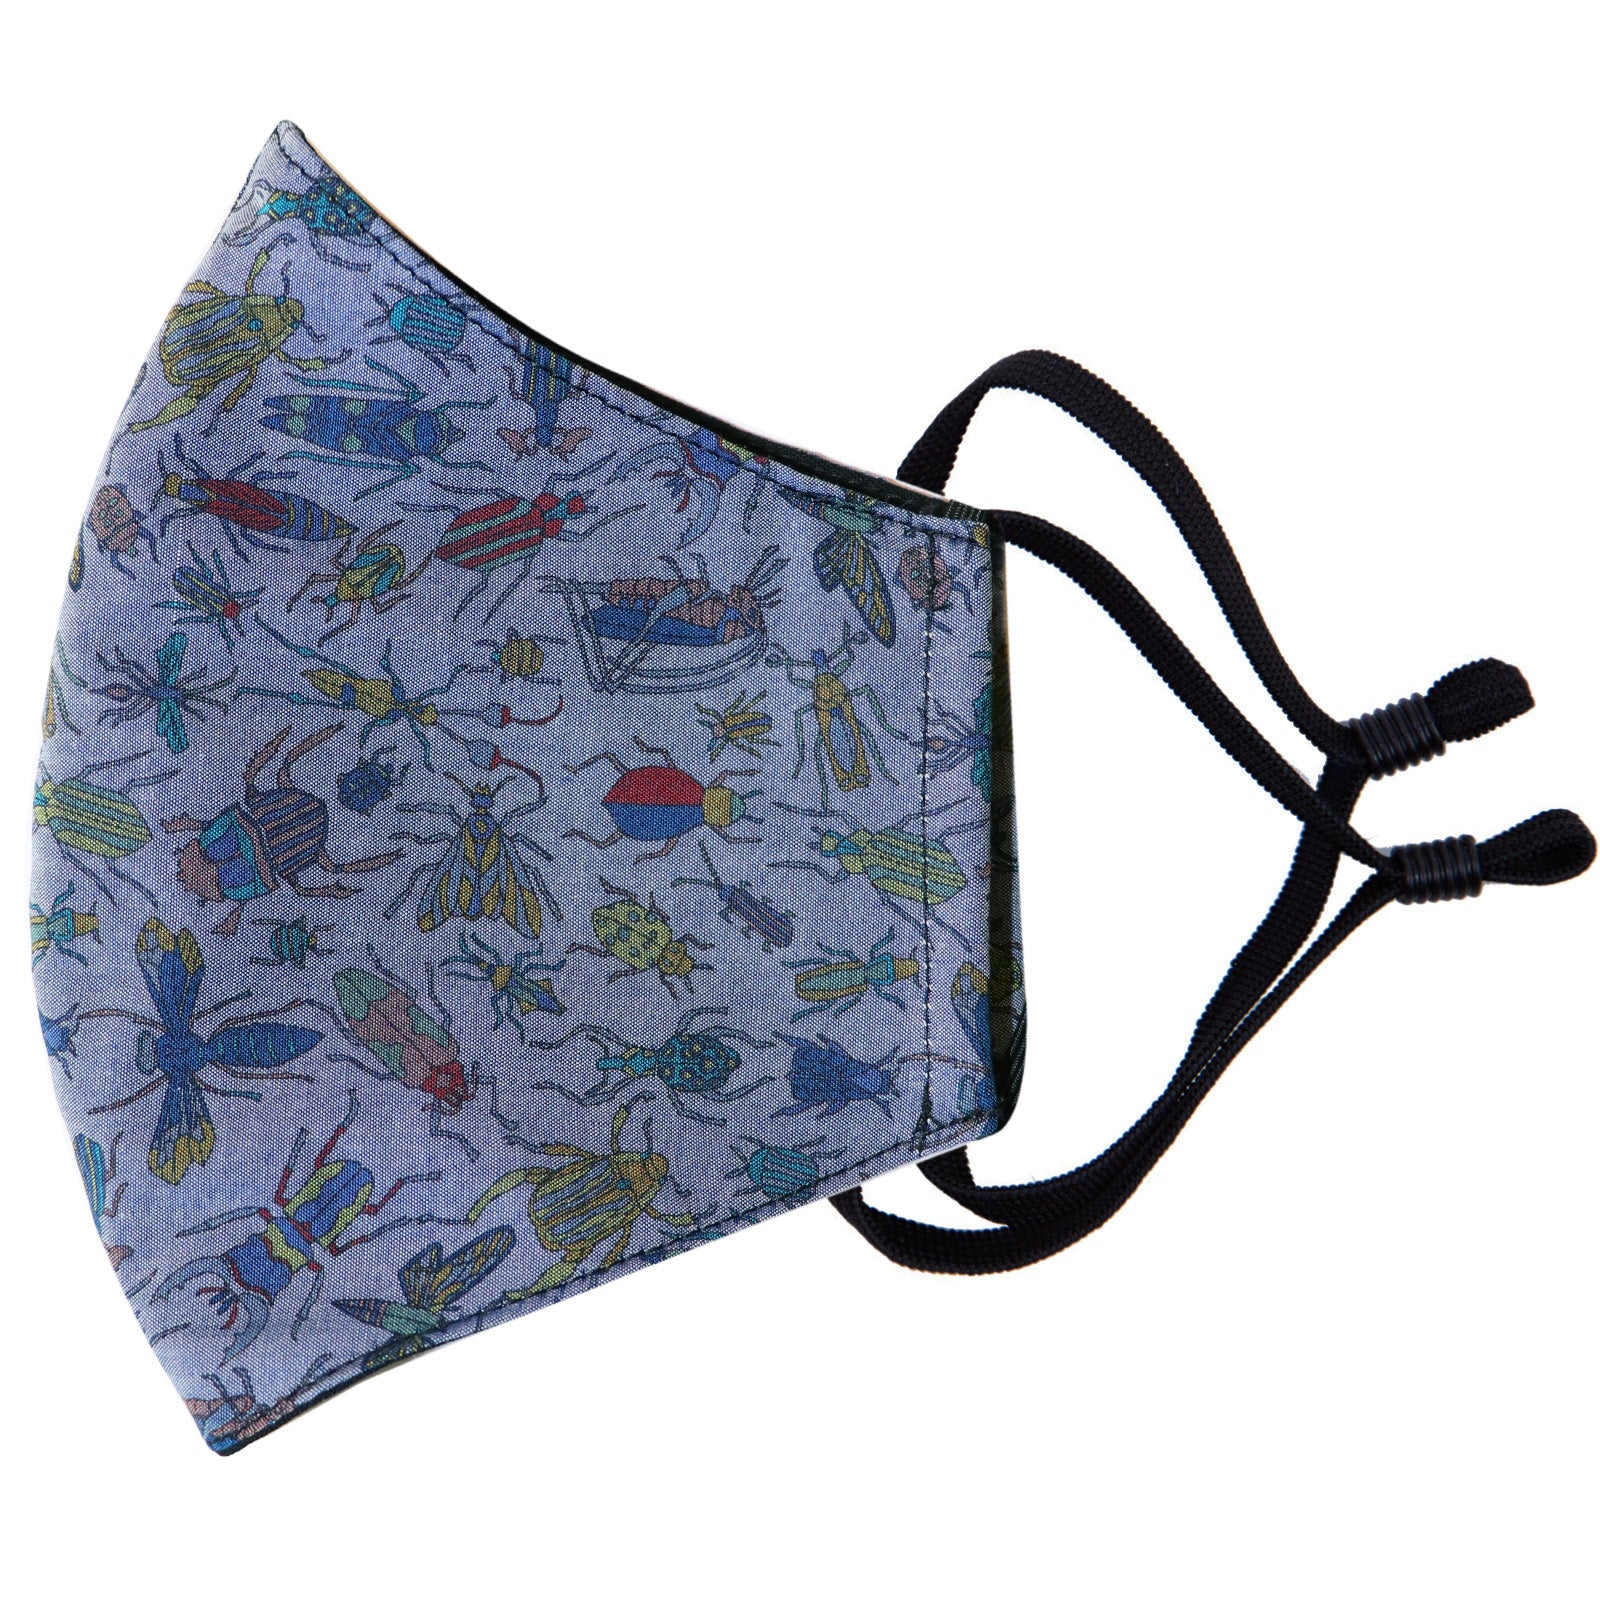 Parisian with Liberty Face Mask - Chambray Bug Catcher